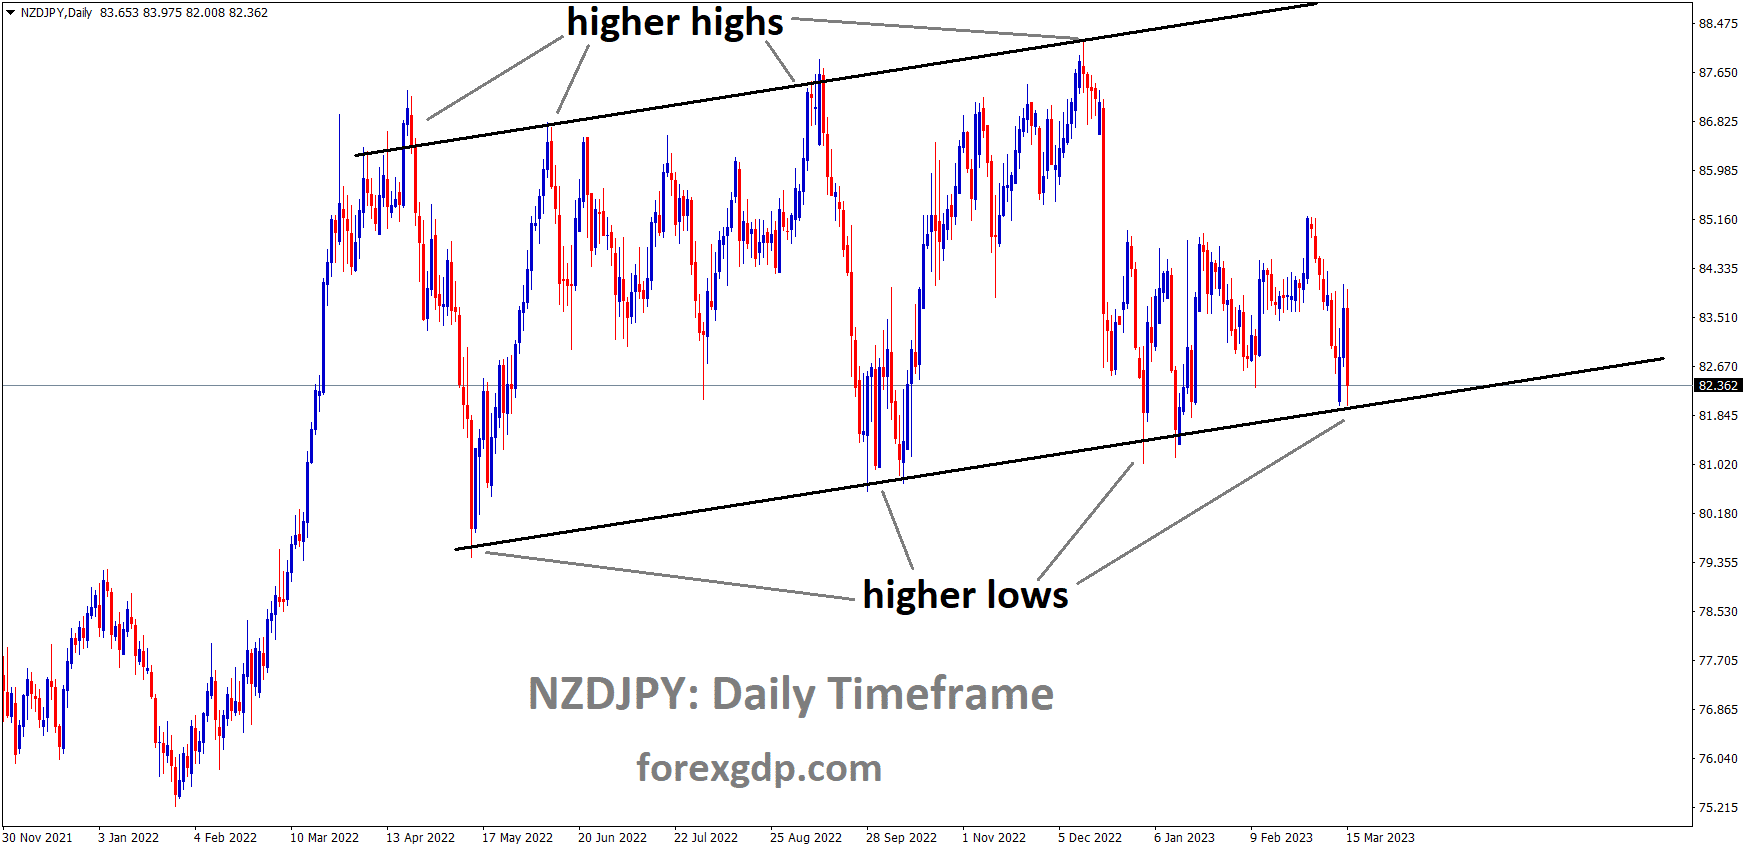 NZDJPY Daily TF analysis Market is moving in an Ascending channel and the market has reached the higher low area of the channel